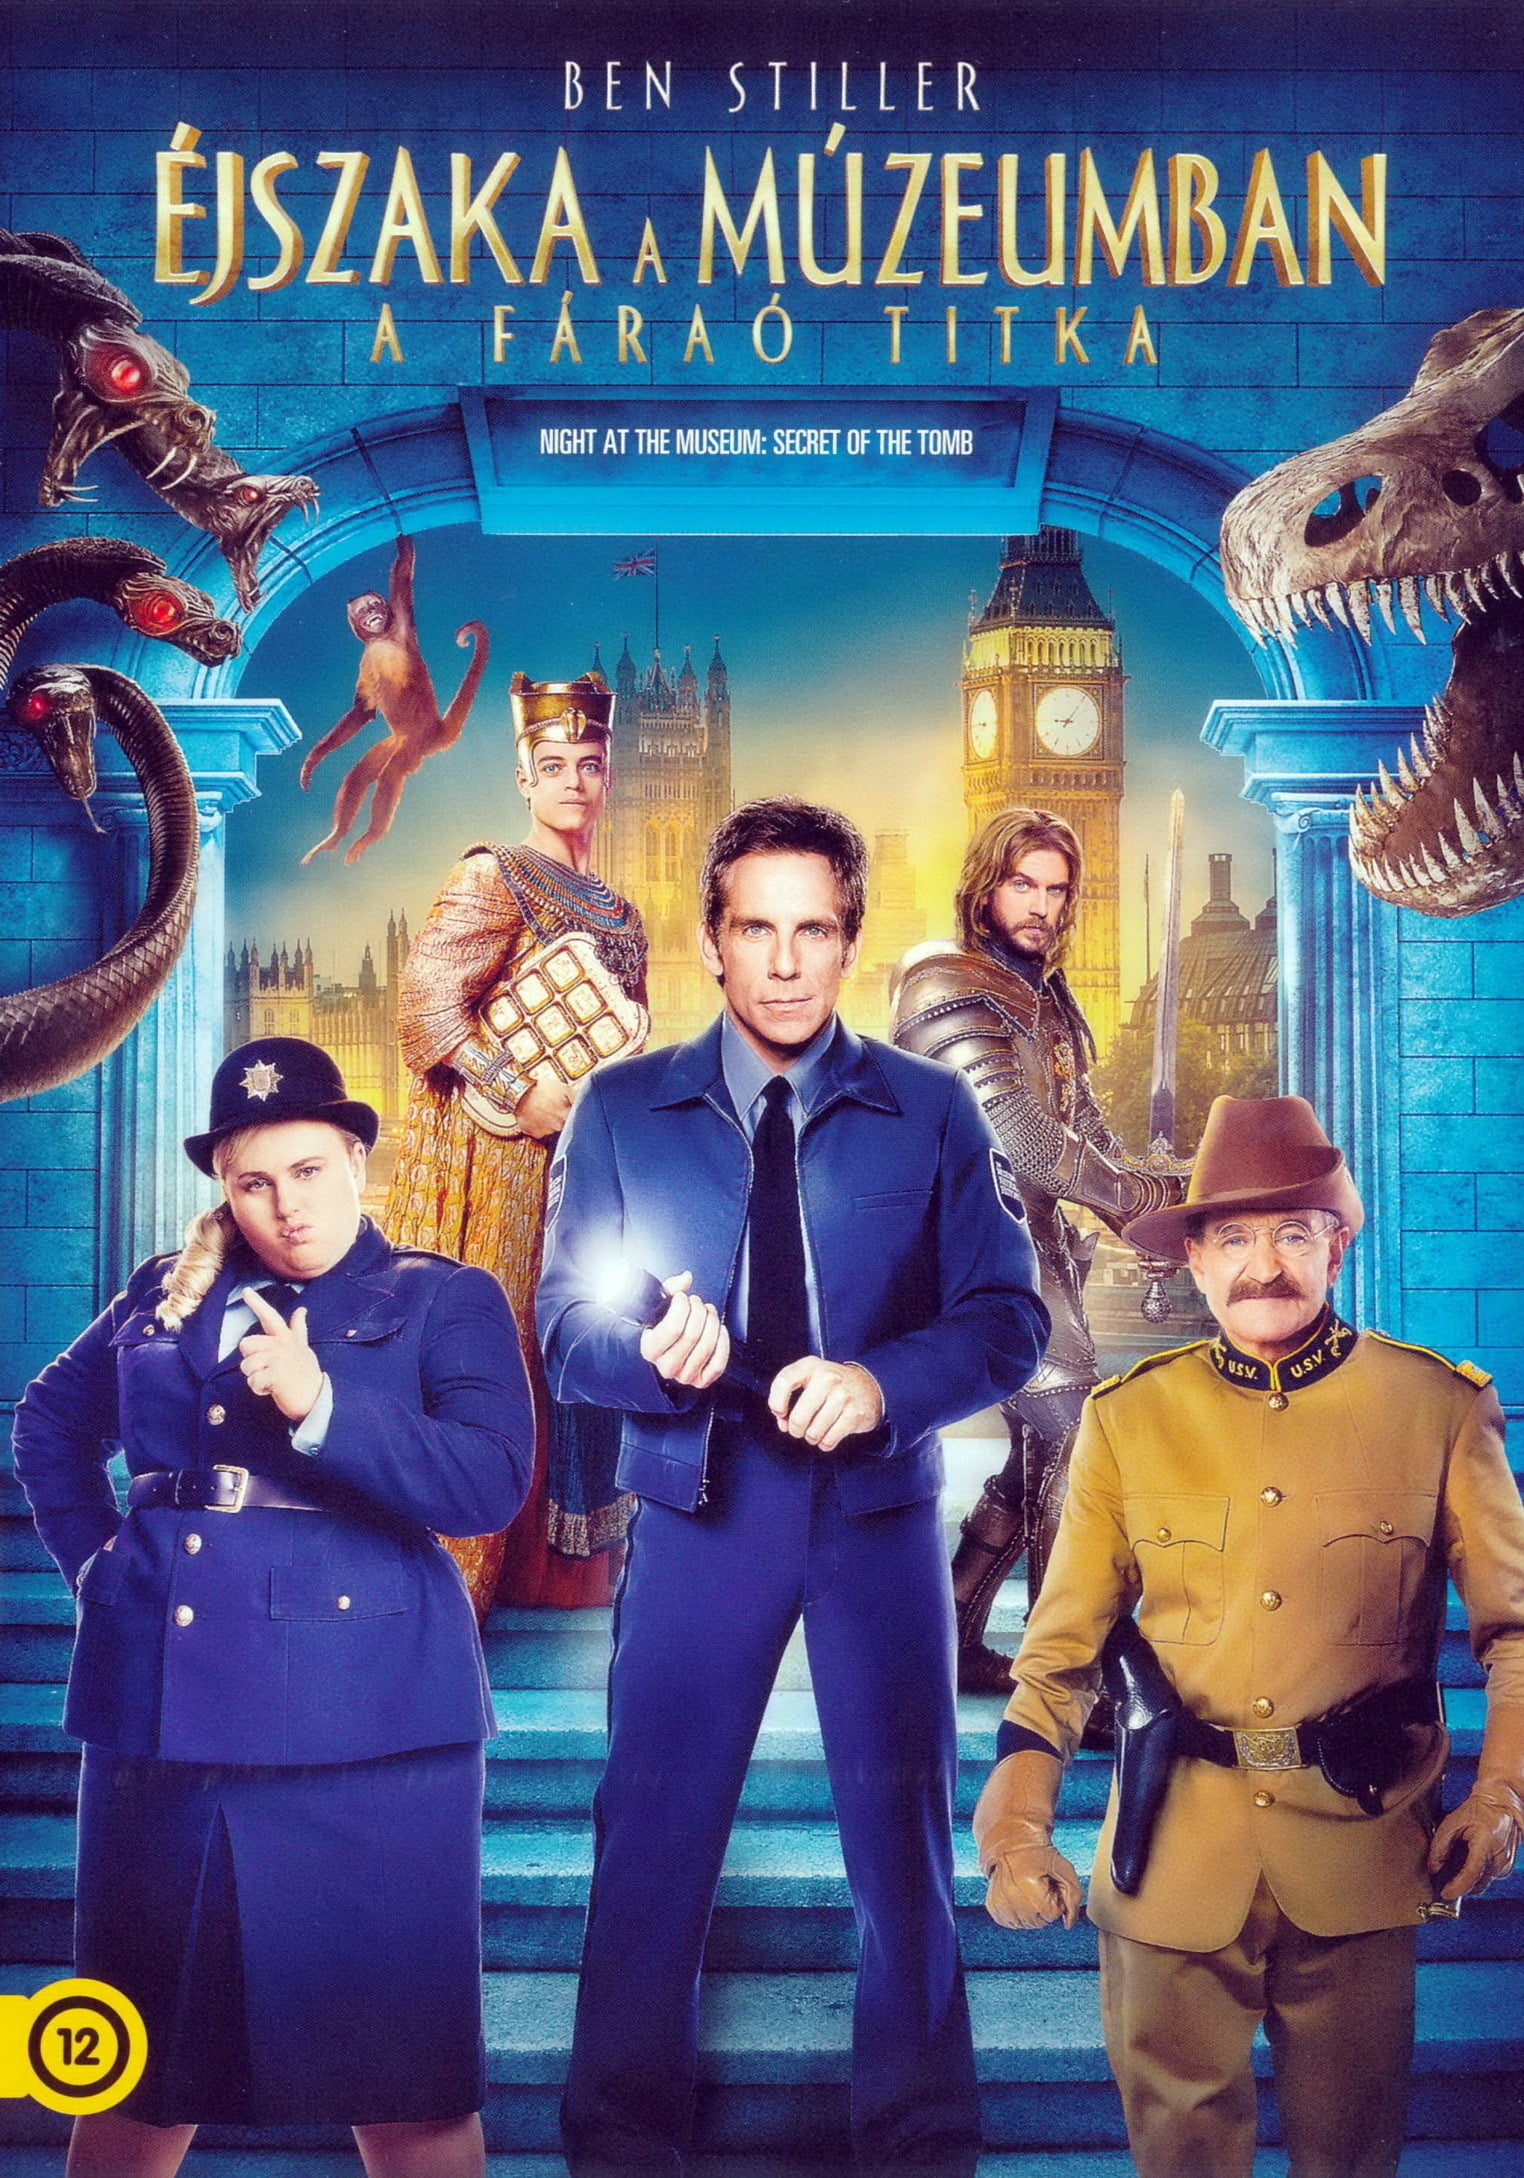 night at the museum 2 dubbed in hindi